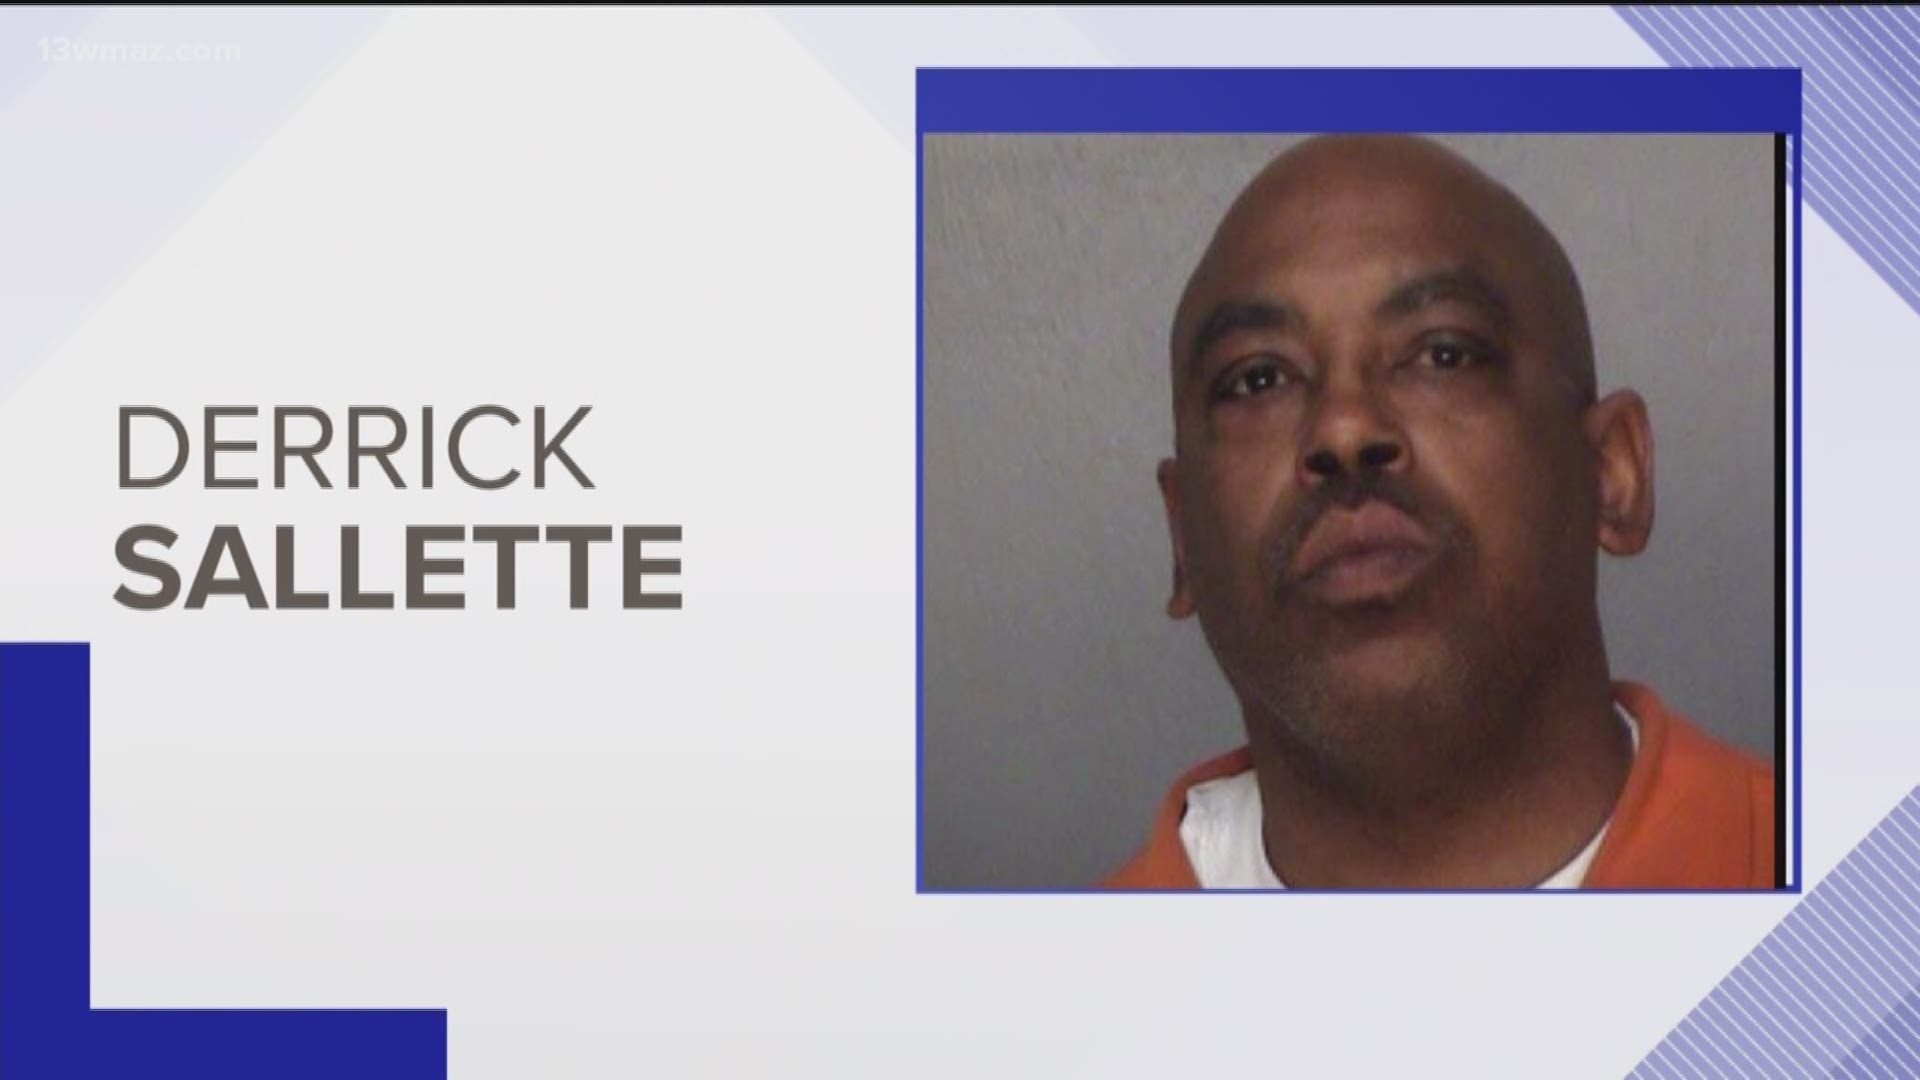 52-year-old Derrick Dewayne Sallette allegedly took the girl to local hotels, photographed, and sexually assaulted her over the course of two years.